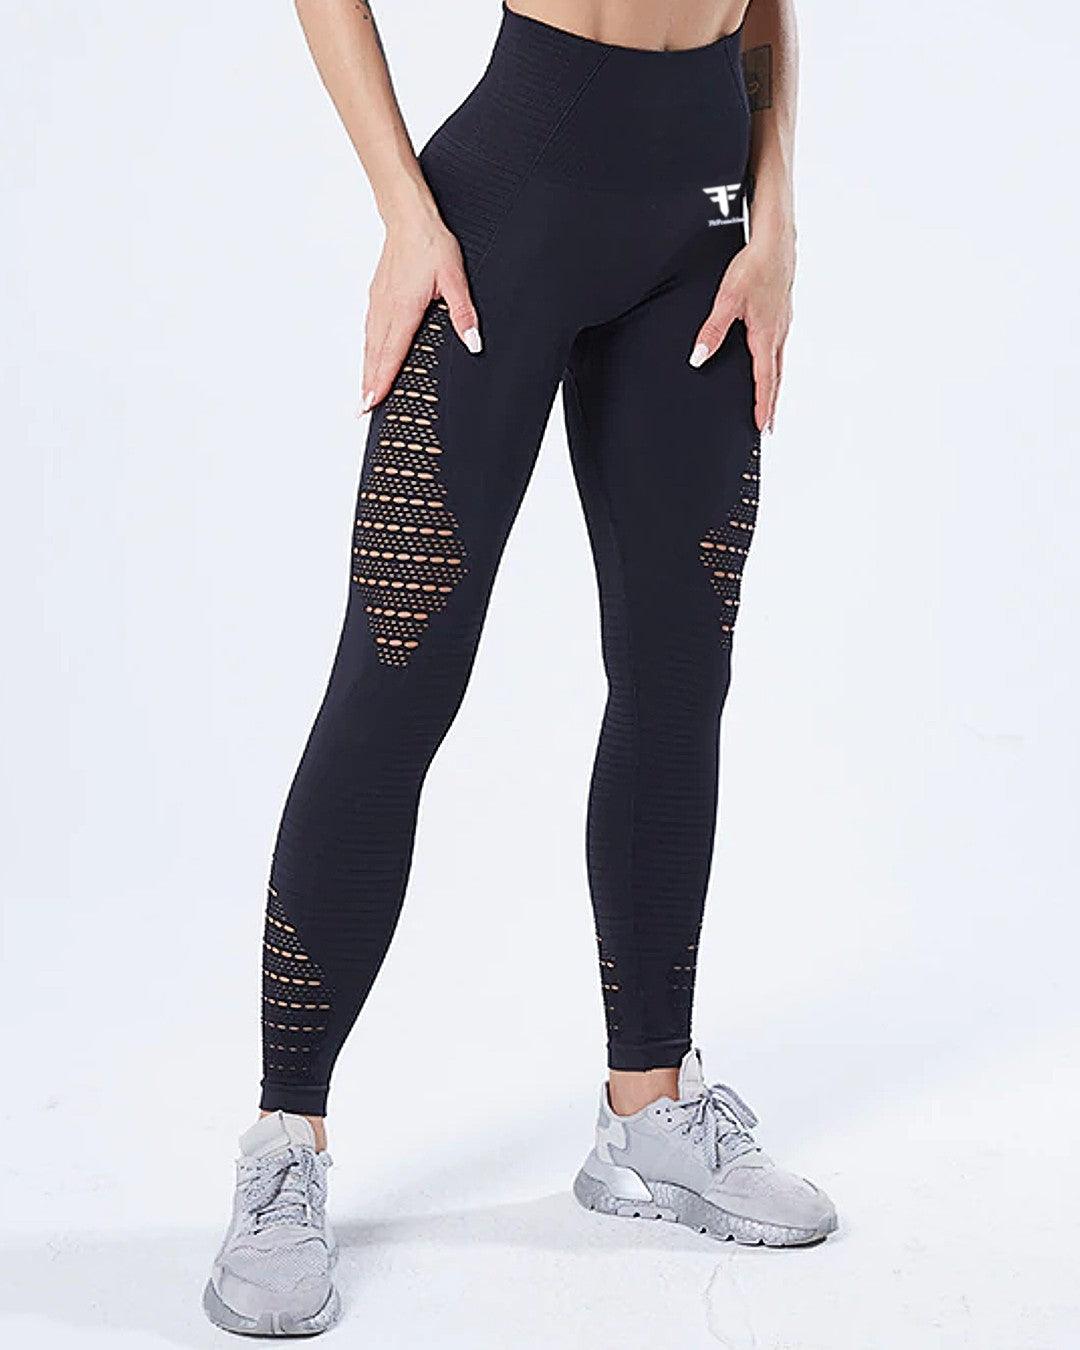 Seamless Performance Leggings – FITFRENCHIES